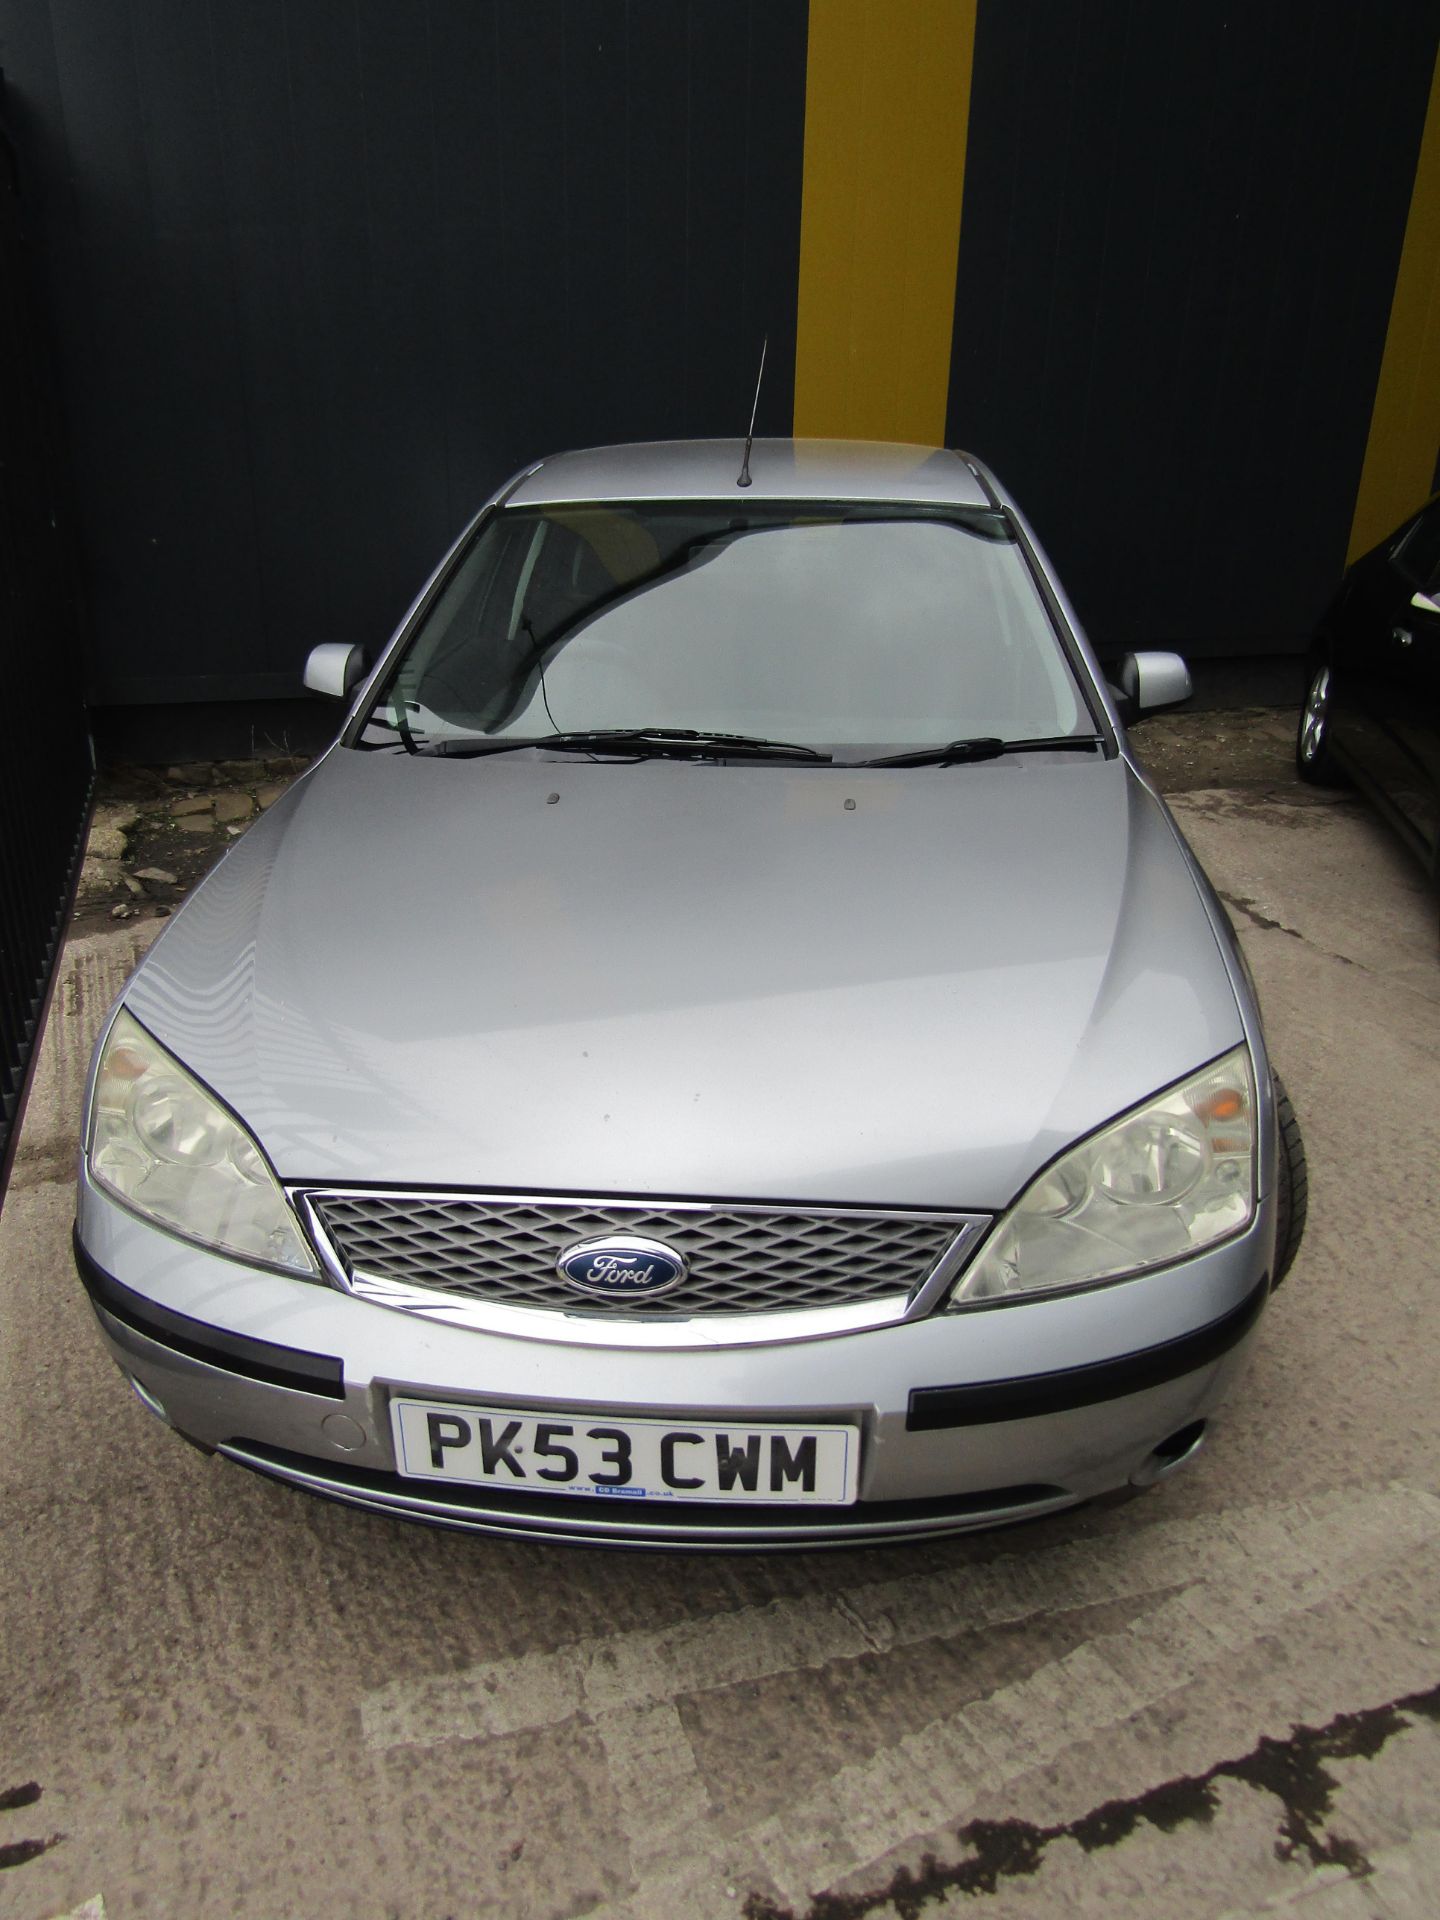 2003 Ford Mondeo Graphite 2.0 TDCI, MOT until 13th September, 89,010 miles (unchecked) comes with - Image 7 of 16